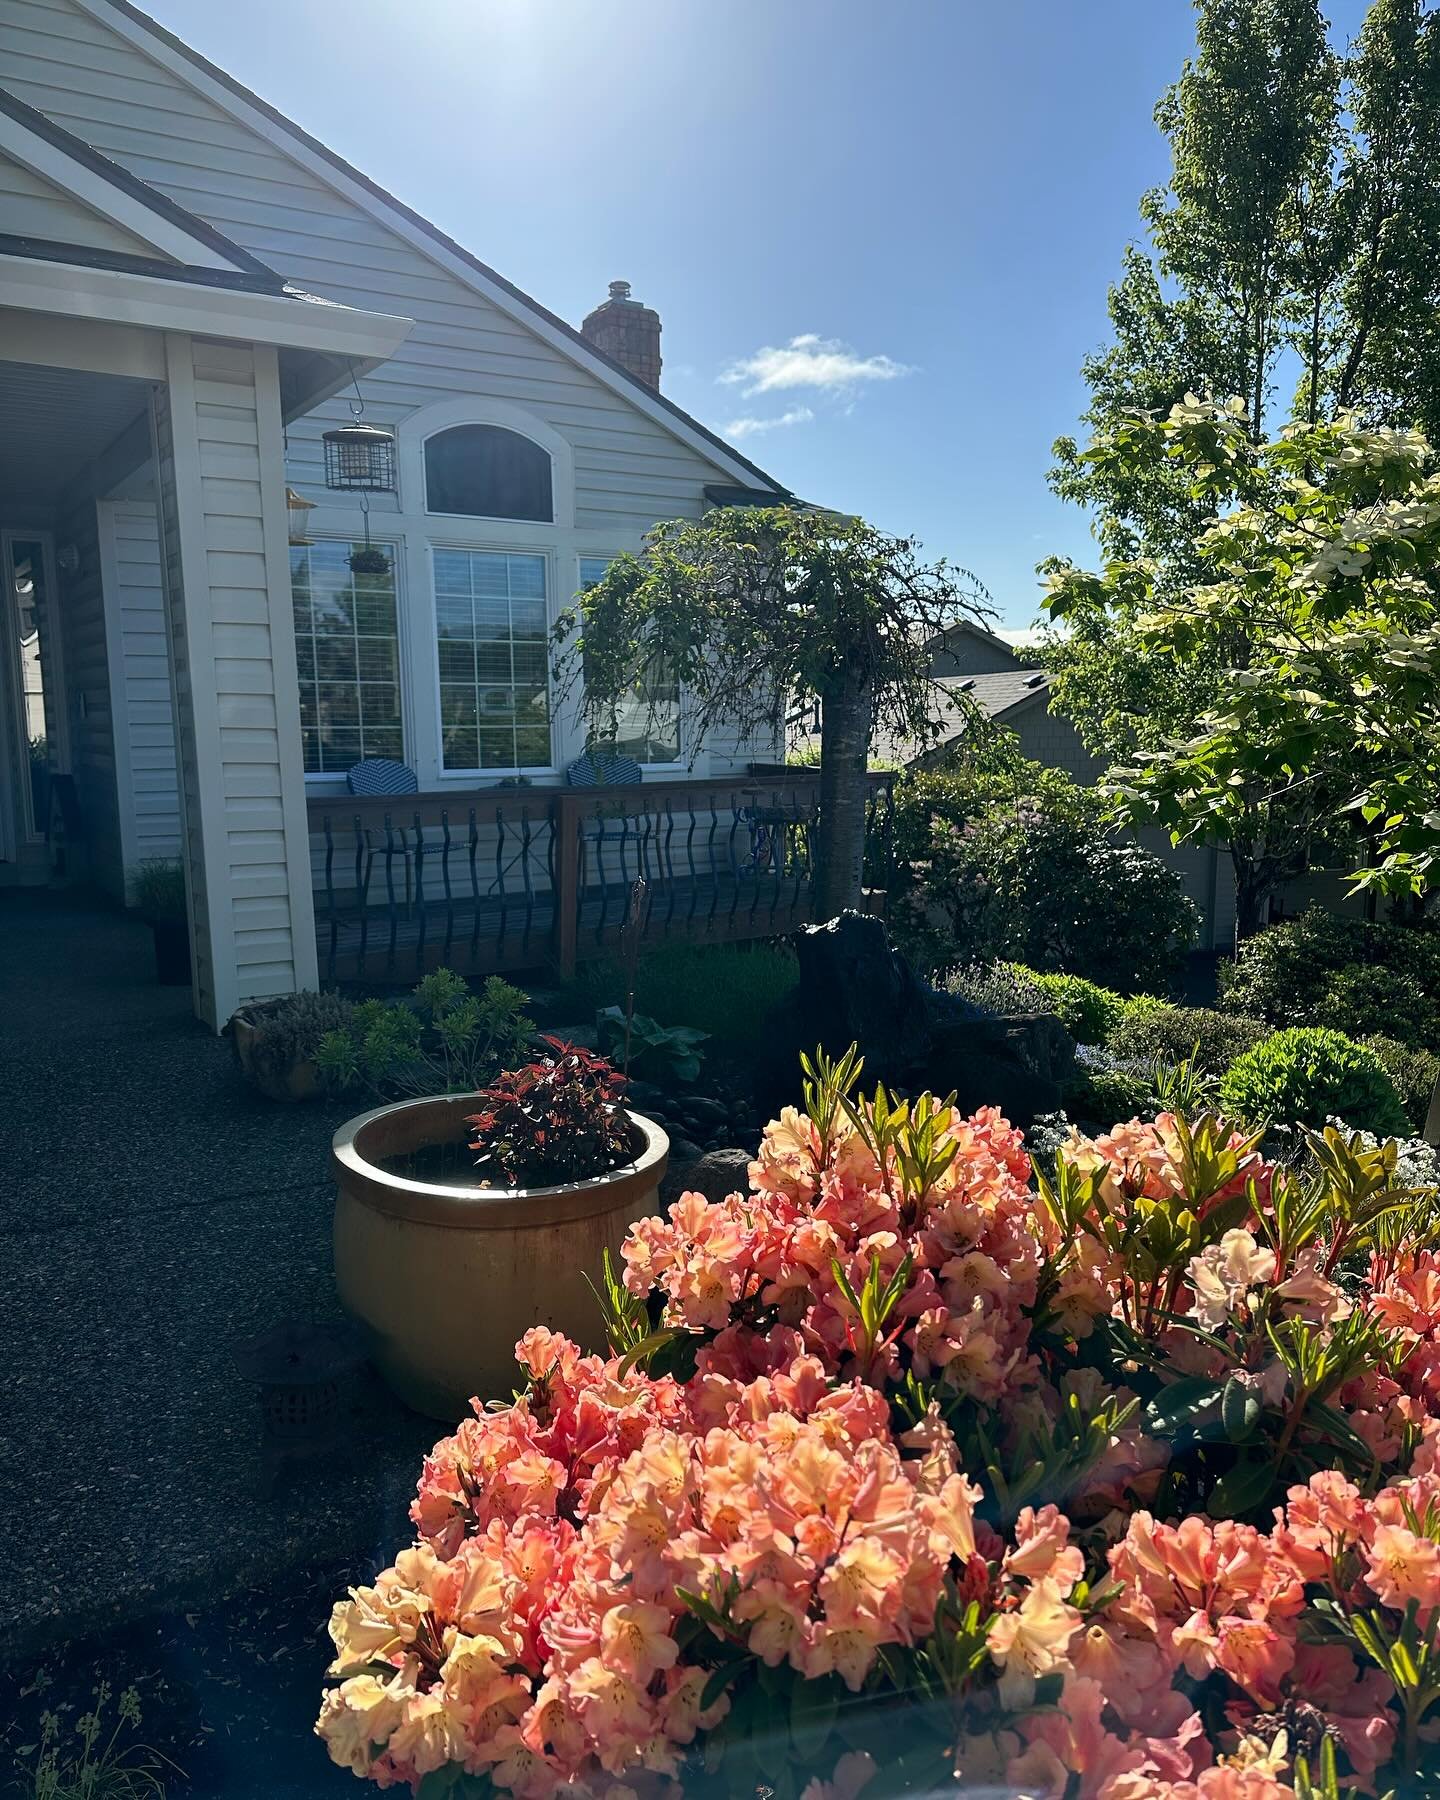 Beautiful morning at the cottage. 
::
::
#springhassprung #cottagelife #pacificnorthwest #lifeisgood #inthegarden